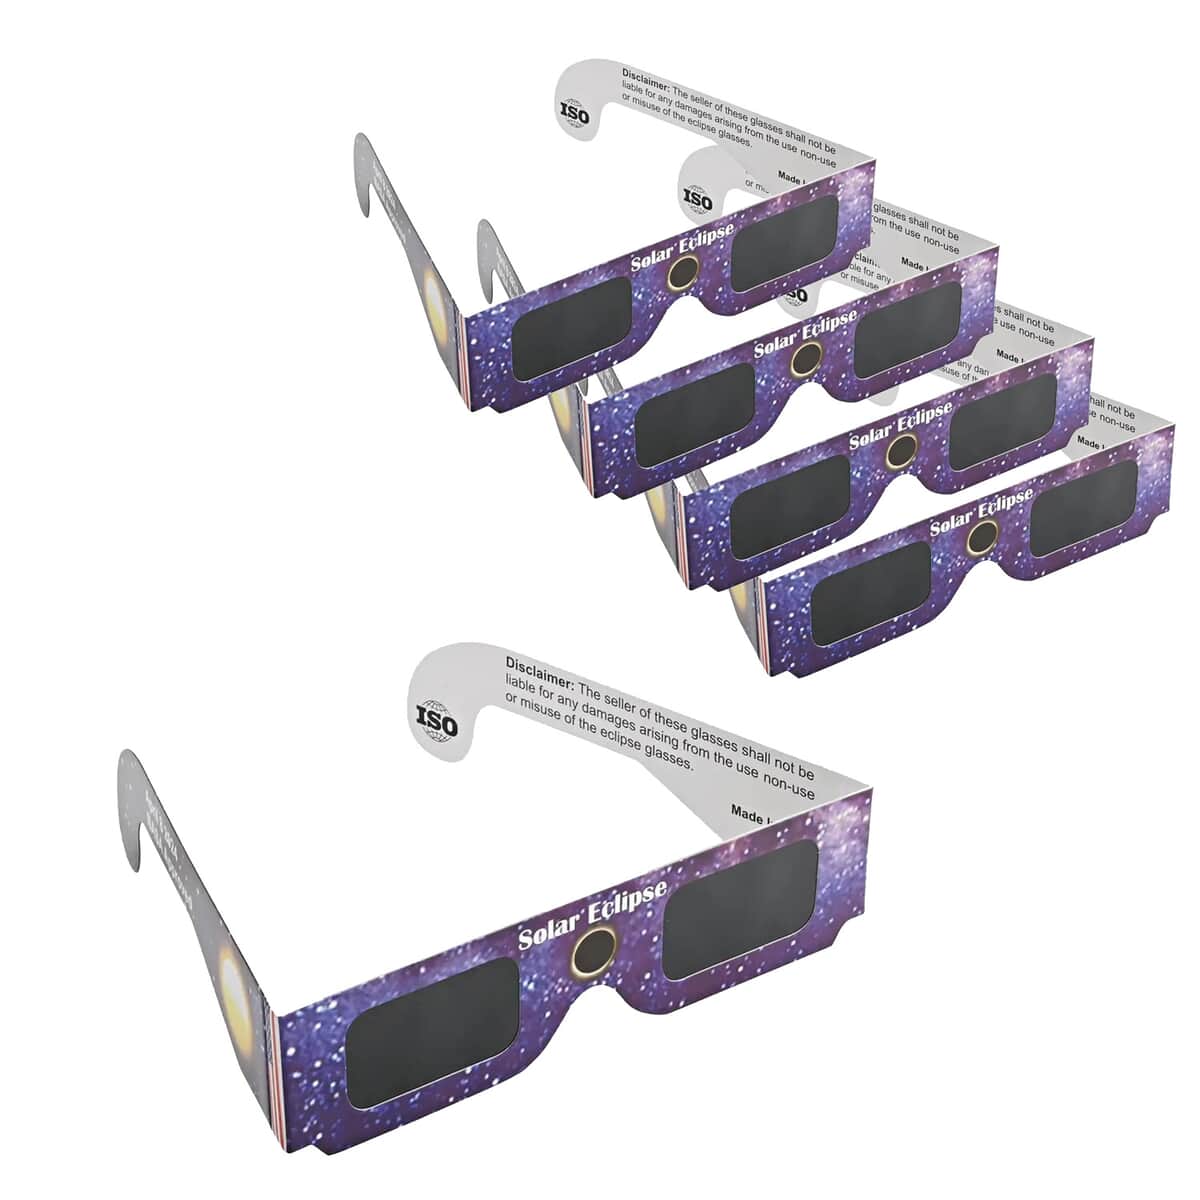 Set of 5 Solar Eclipse Viewing Glasses, Safe Shades for Direct Sun Viewing image number 0